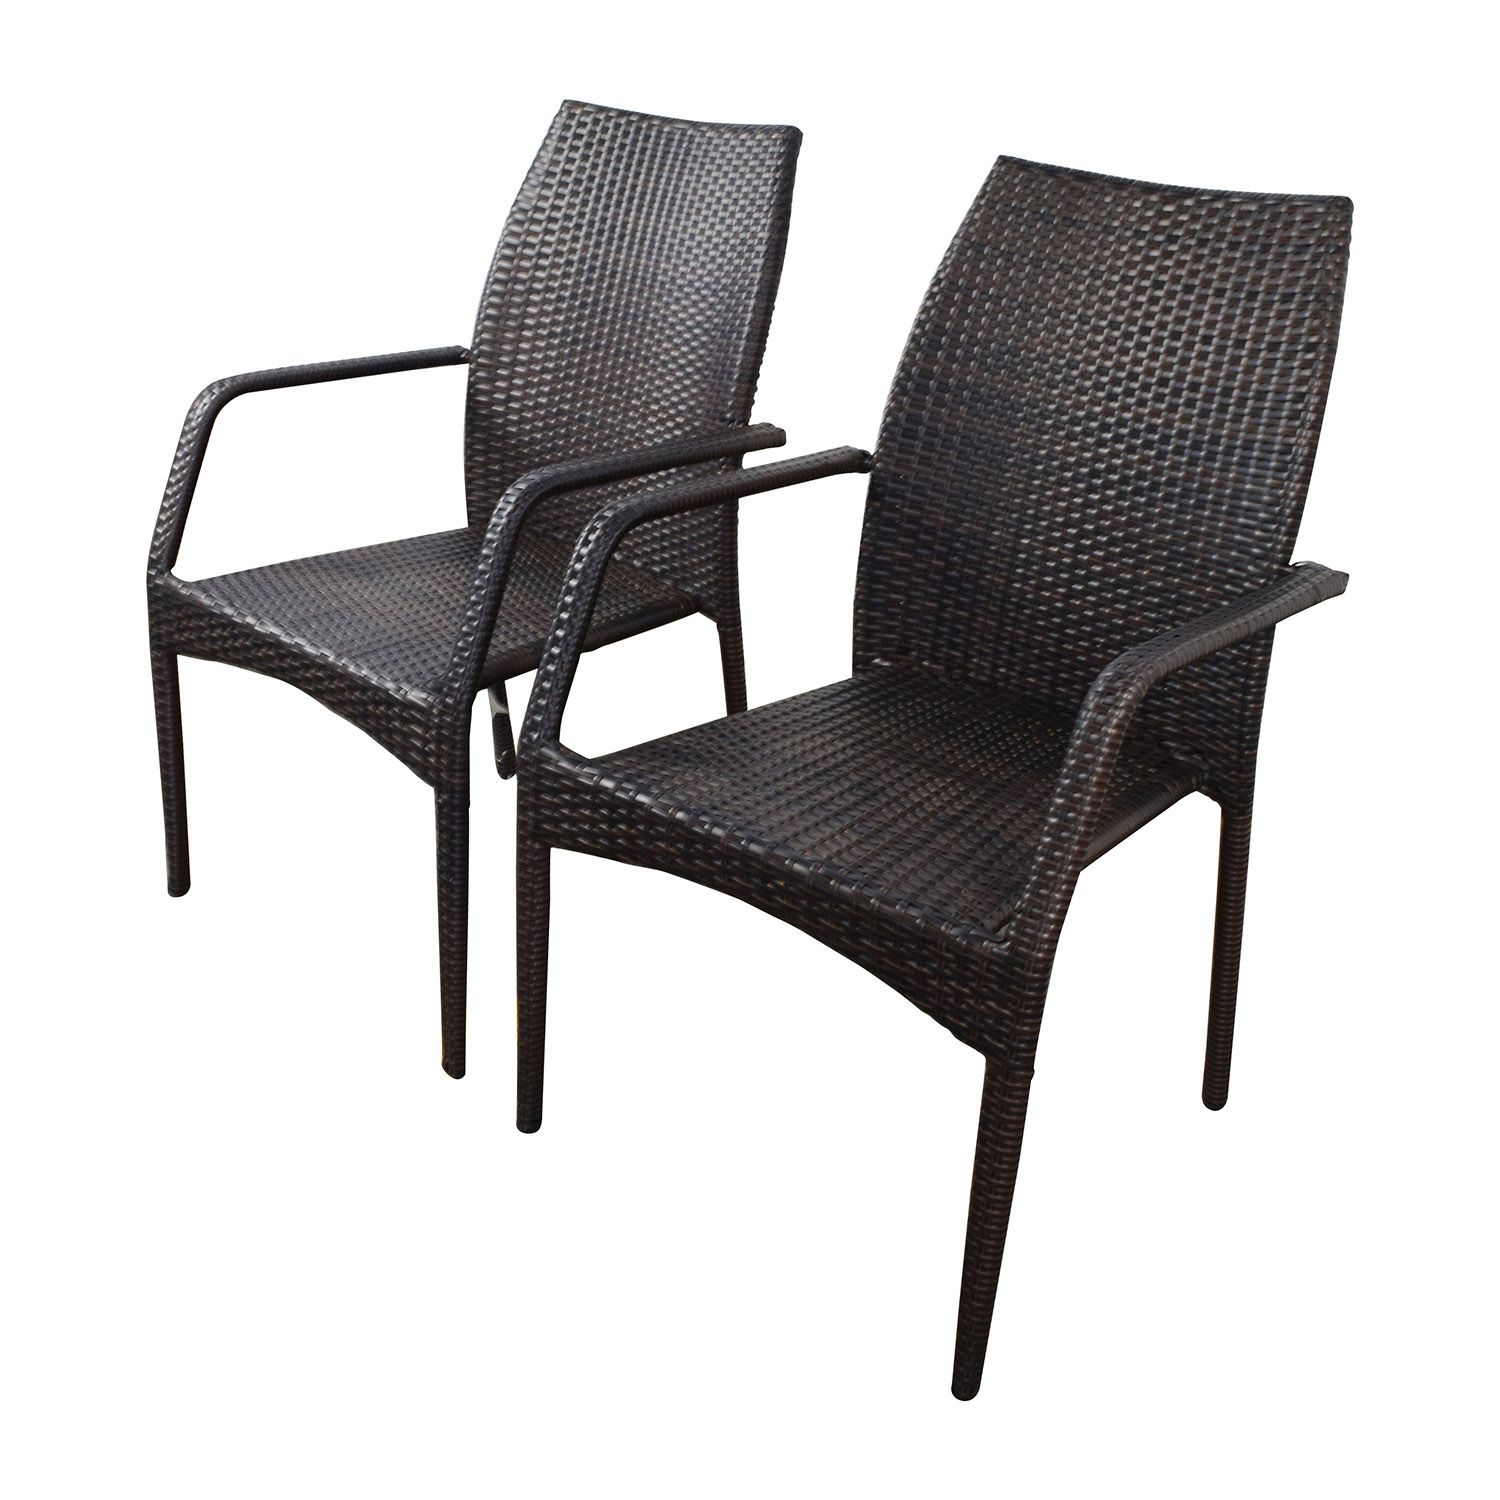 85% Off – Dark Brown Wicker Outdoor Dining Chairs / Chairs With Regard To Dark Brown Wood Outdoor Chairs (View 5 of 15)